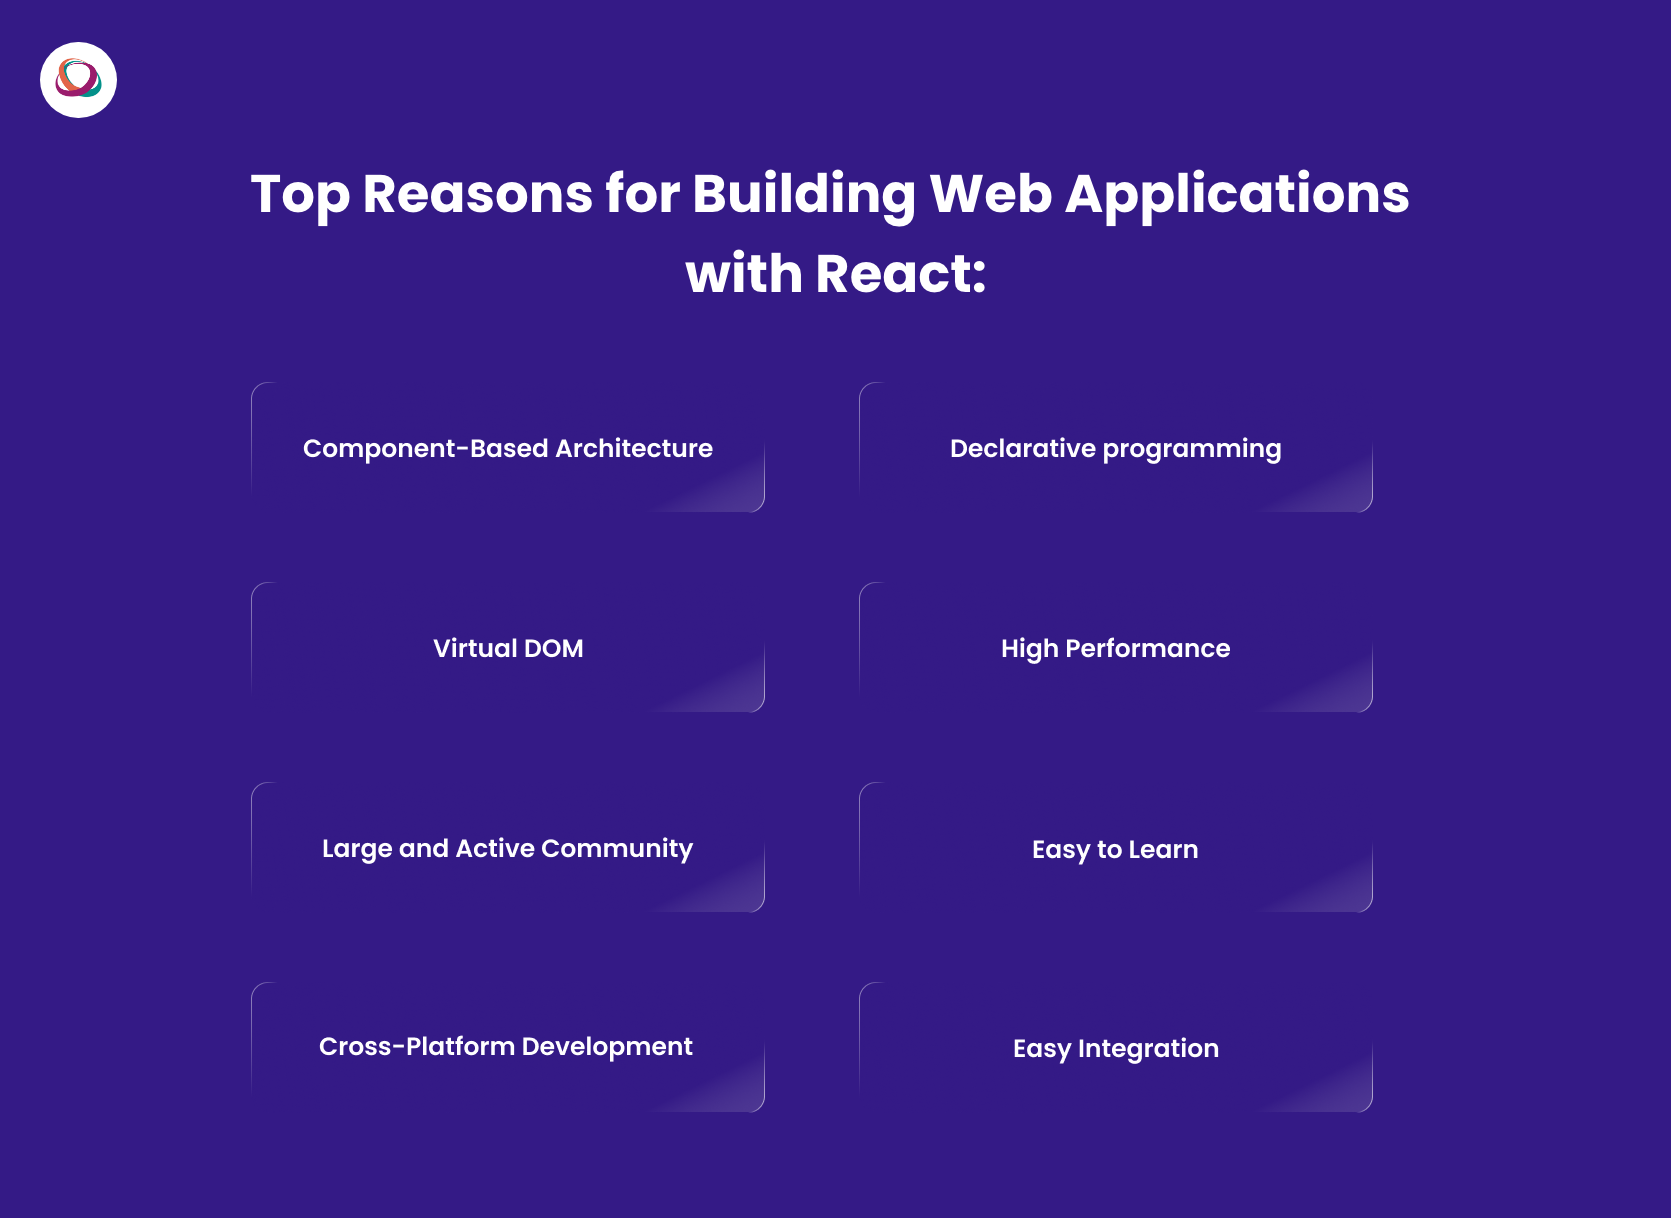 Top Reasons for Building Web Applications with React
